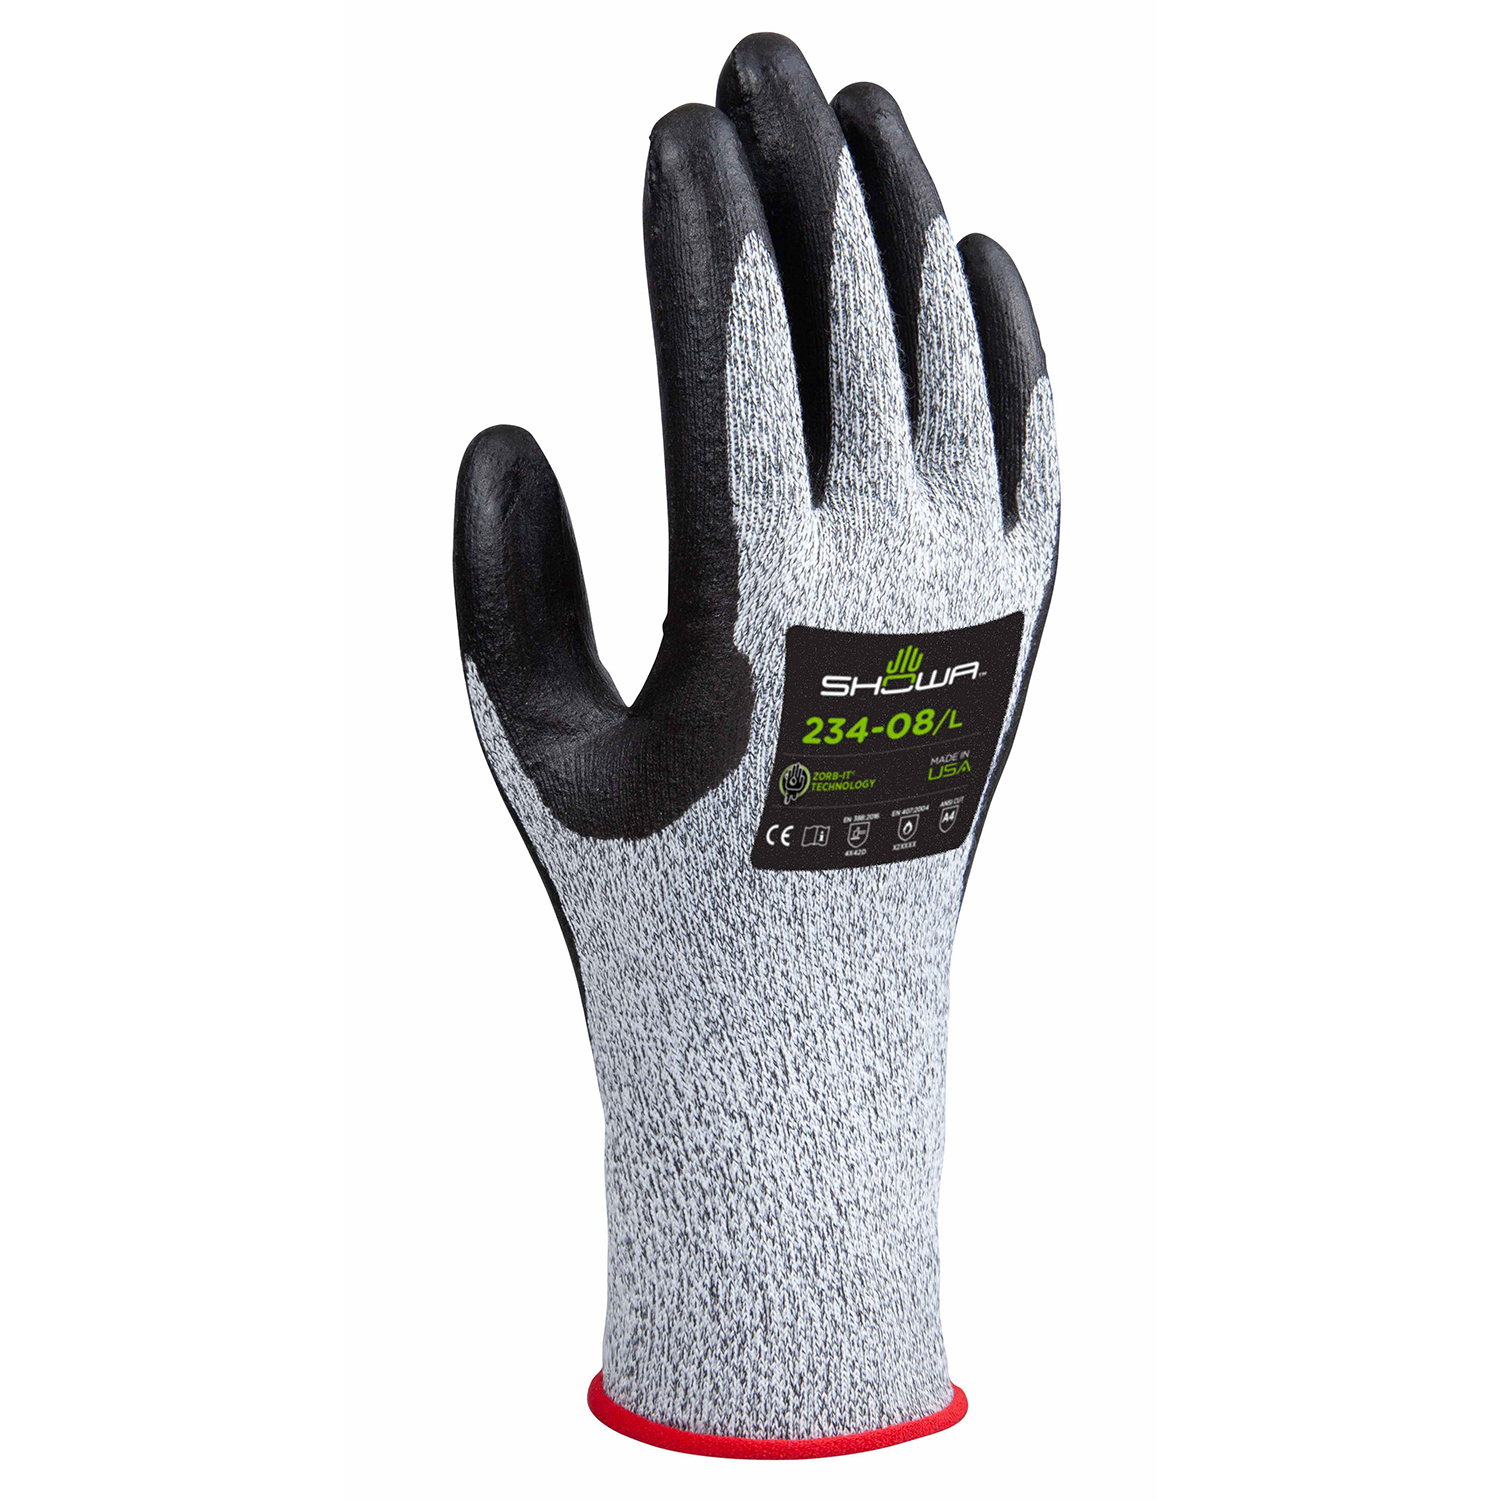 Foam nitrile palm, 15 gauge seamless spandex/engineered cut resistant liner reinforced w/HPPE,  black & white w/gray, ANSI CUT LEVEL A4/extra large